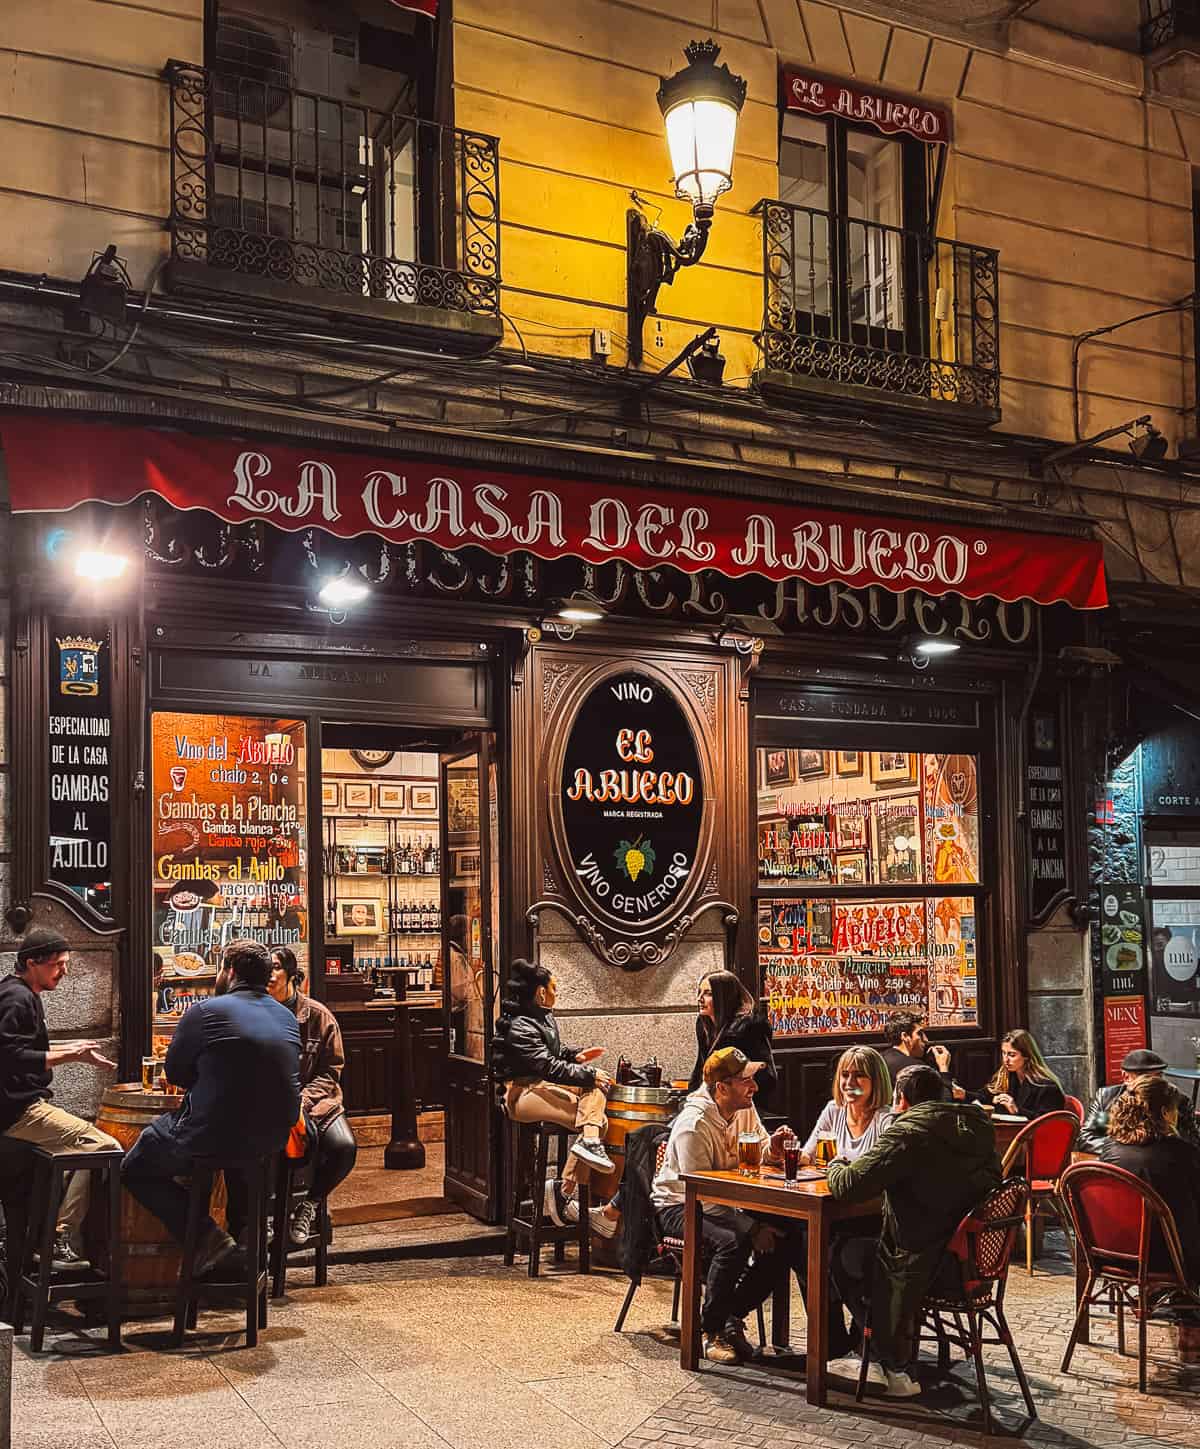 Evening view of 'La Casa del Abuelo', a traditional Spanish bar, with its warmly lit facade and patrons enjoying drinks at tables on the sidewalk under a quaint street lamp